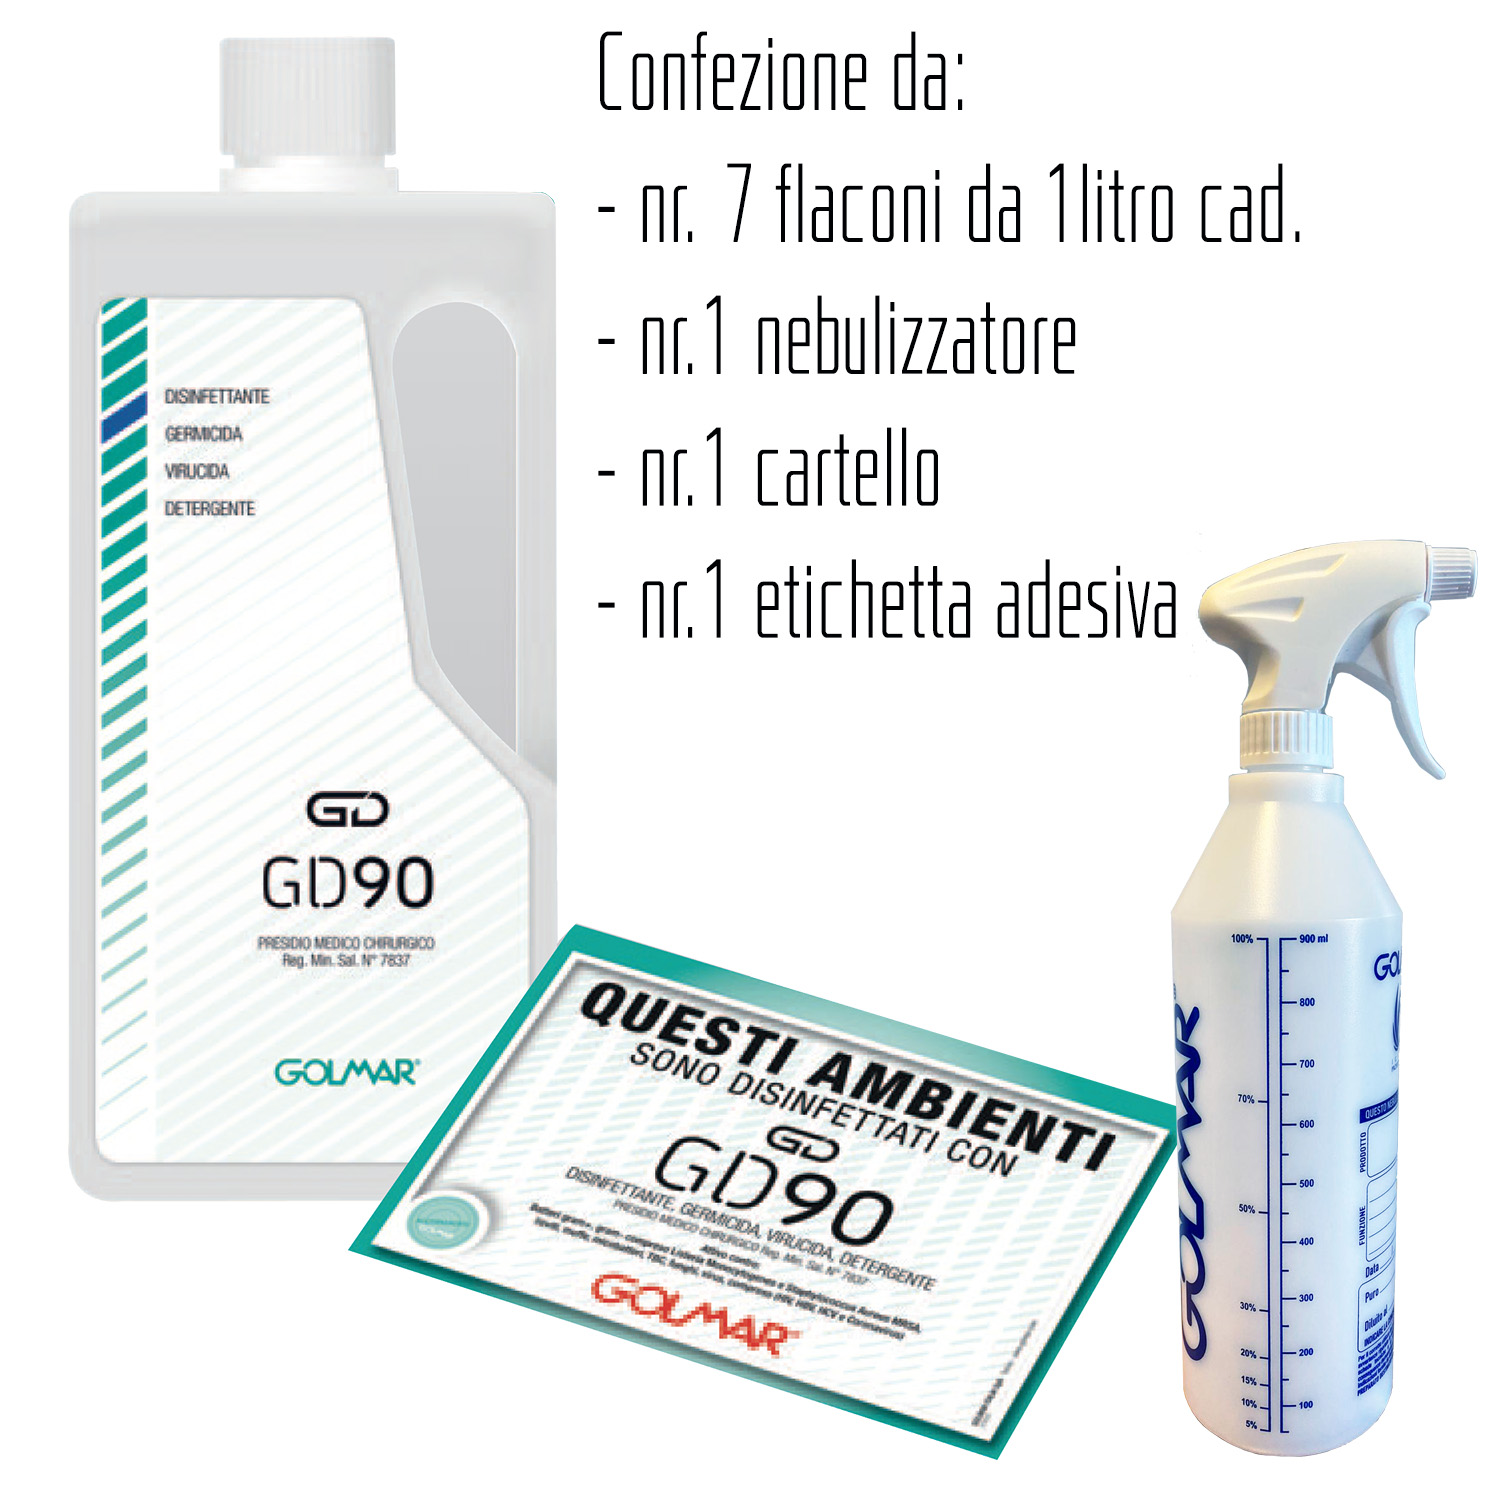 GD90 liquid 1 liter - Biocide - broad-spectrum professional disinfectant (effective against viruses including Coronavirus, bacteria, yeasts and molds) - package with 7 bottles 1 liter, 1 trigger bottle.